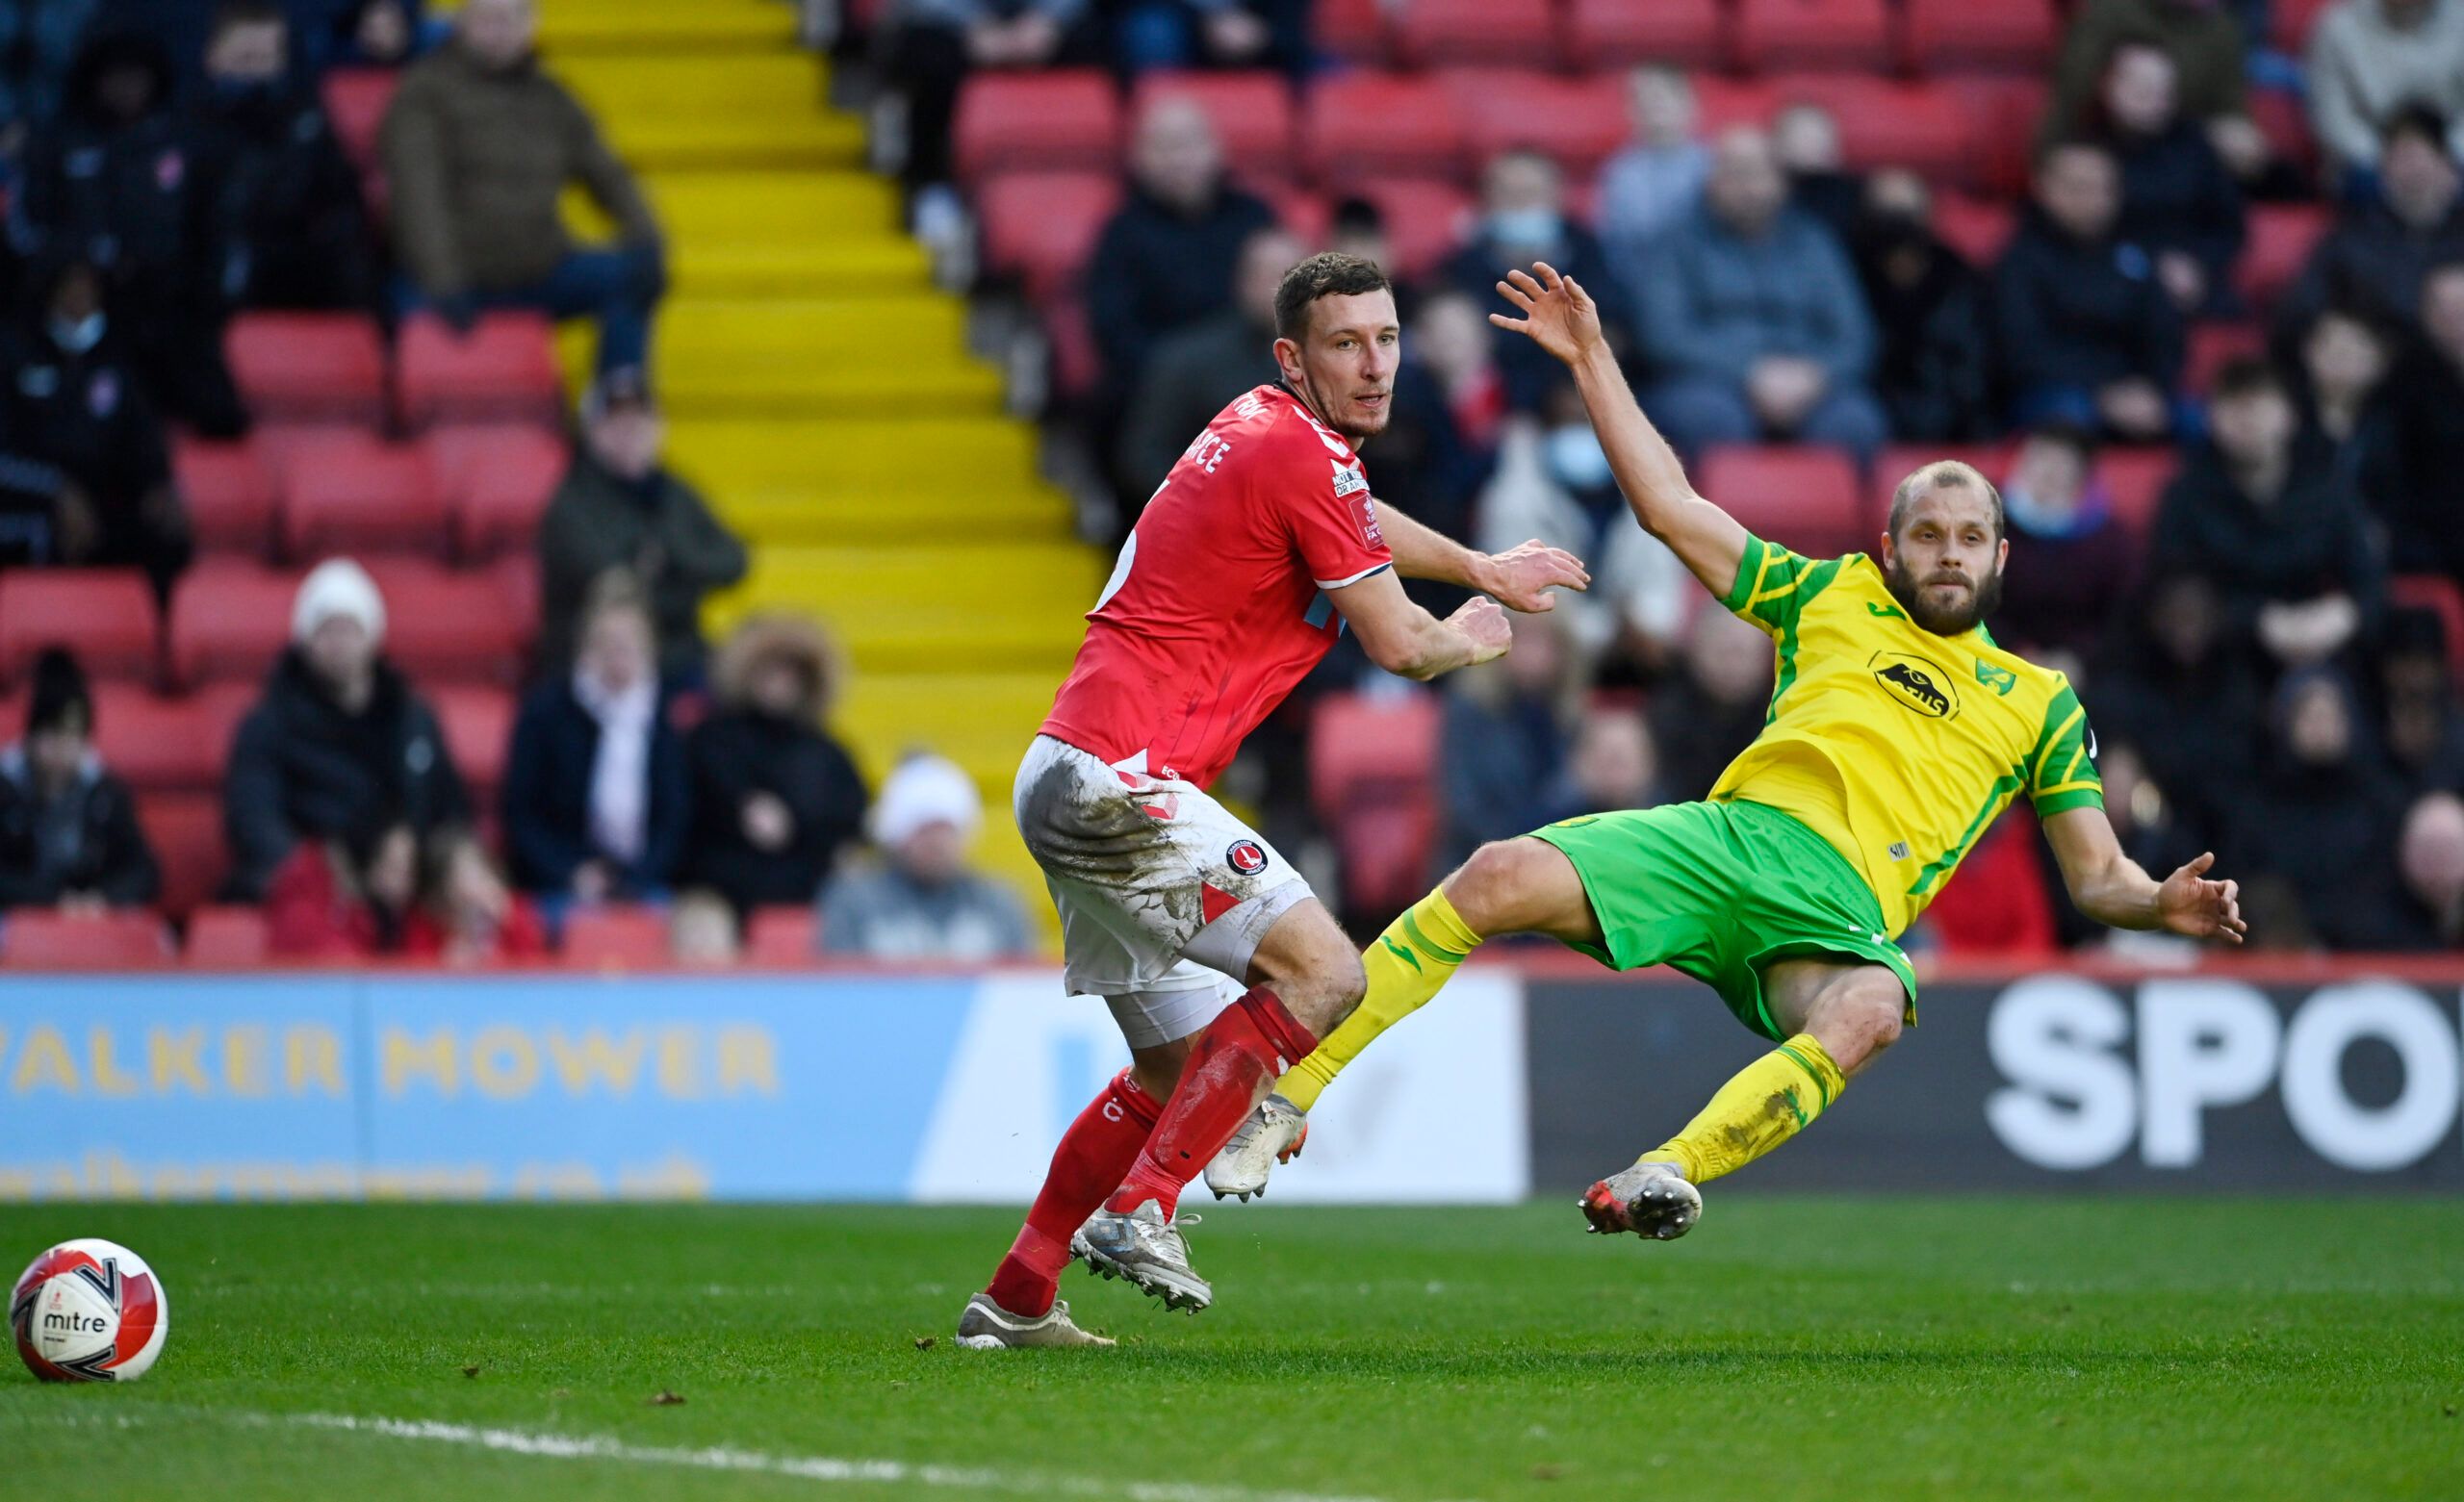 Soccer Football - FA Cup Third Round - Charlton Athletic v Norwich City - The Valley, London, Britain - January 9, 2022 Norwich City's Teemu Pukki in action with Charlton Athletic's Jason Pearce REUTERS/Tony Obrien